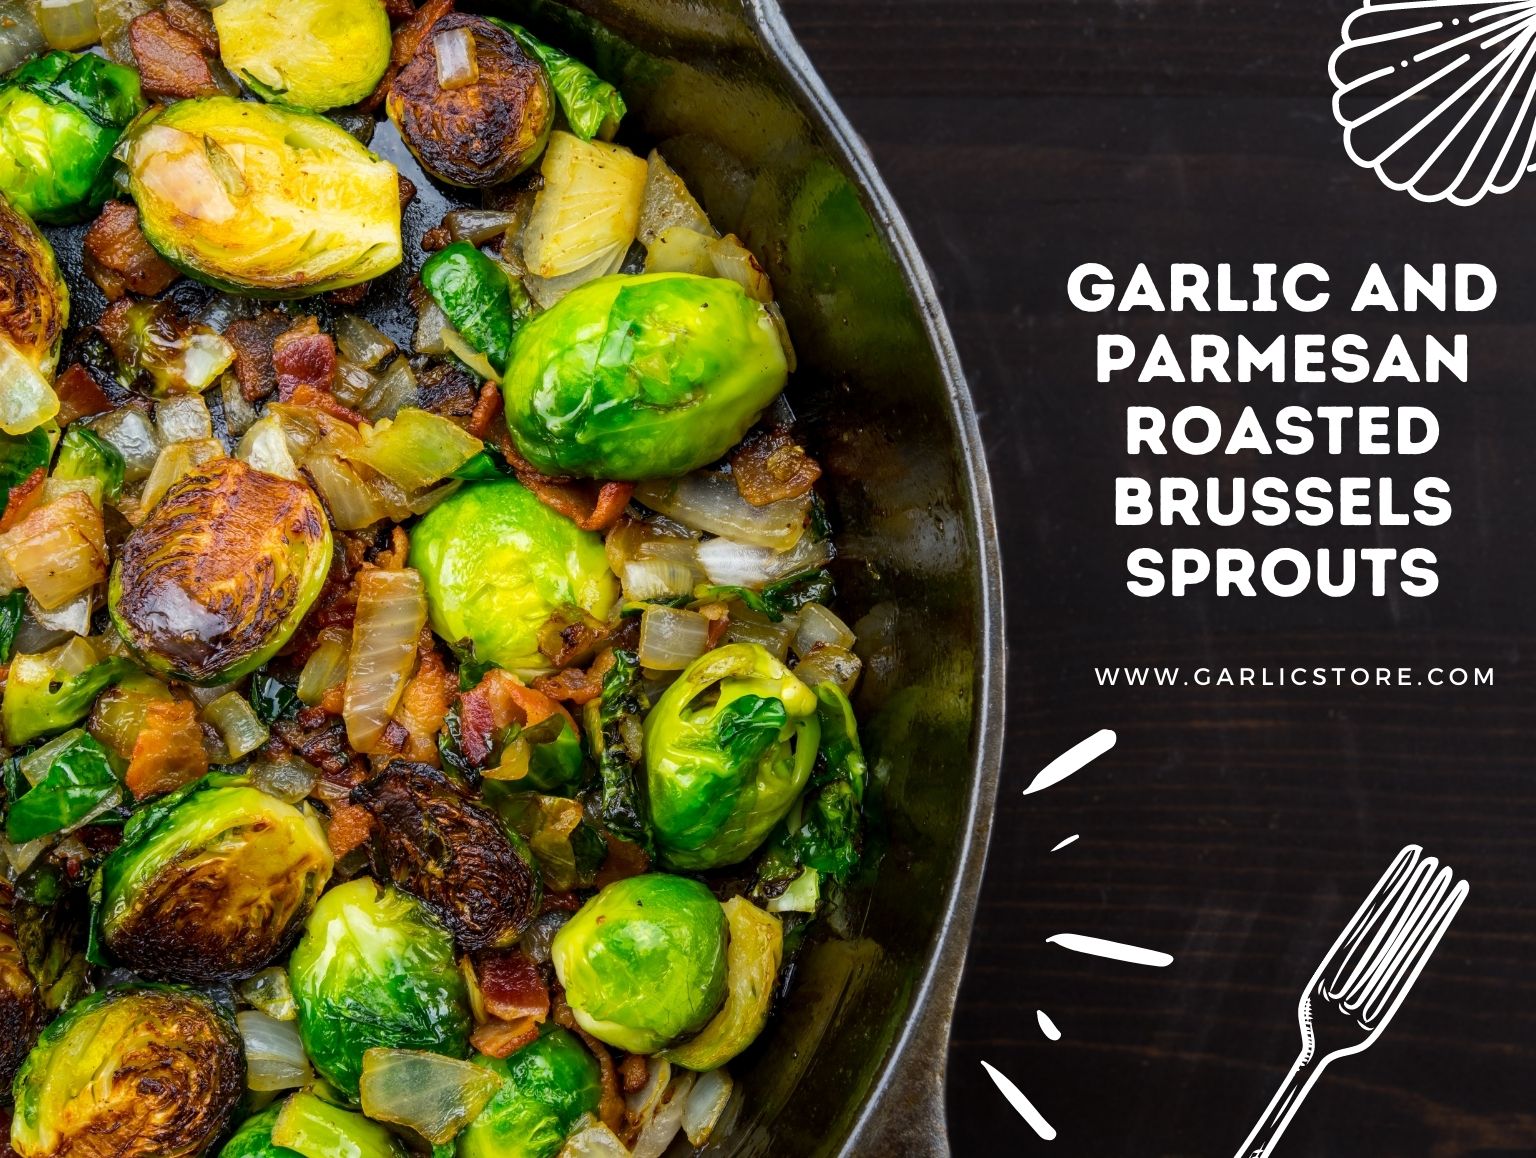 Garlic and Parmesan Roasted Brussels Sprouts